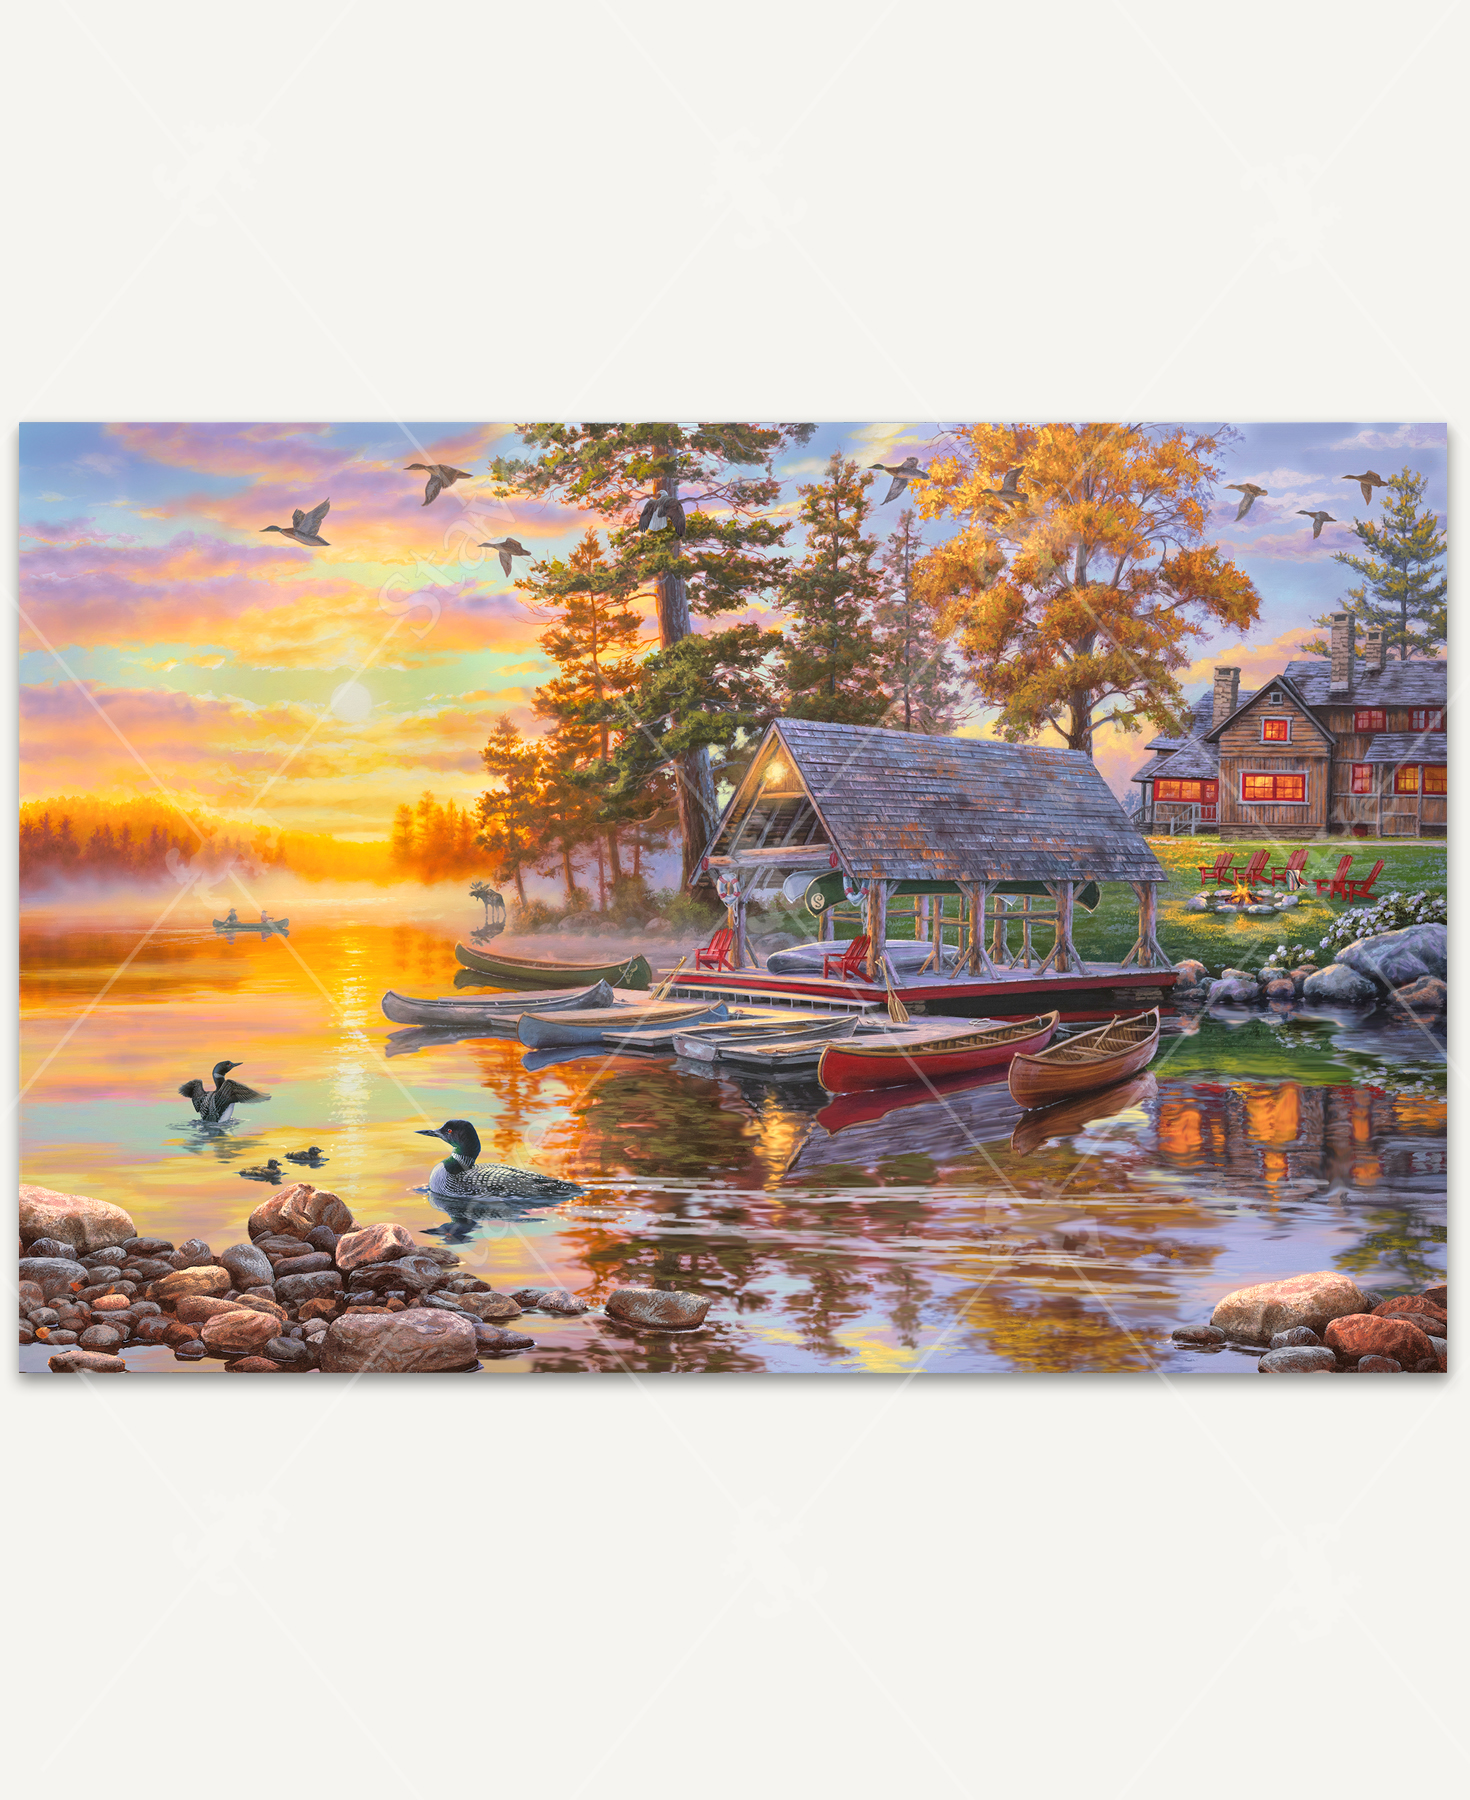 Canoe Camp Buffalo wooden jigsaw puzzle unveils an autumn evening of a lake view property. Two people take a canoe ride on the lake as the sun sets, reflecting vibrant pastel colors on the water. A moose stands on the shore line watching the boat as ducks swim near canoes lining the perimeter of a boat dock. Adirondack chairs surround a fire pit off the side of a cabin.